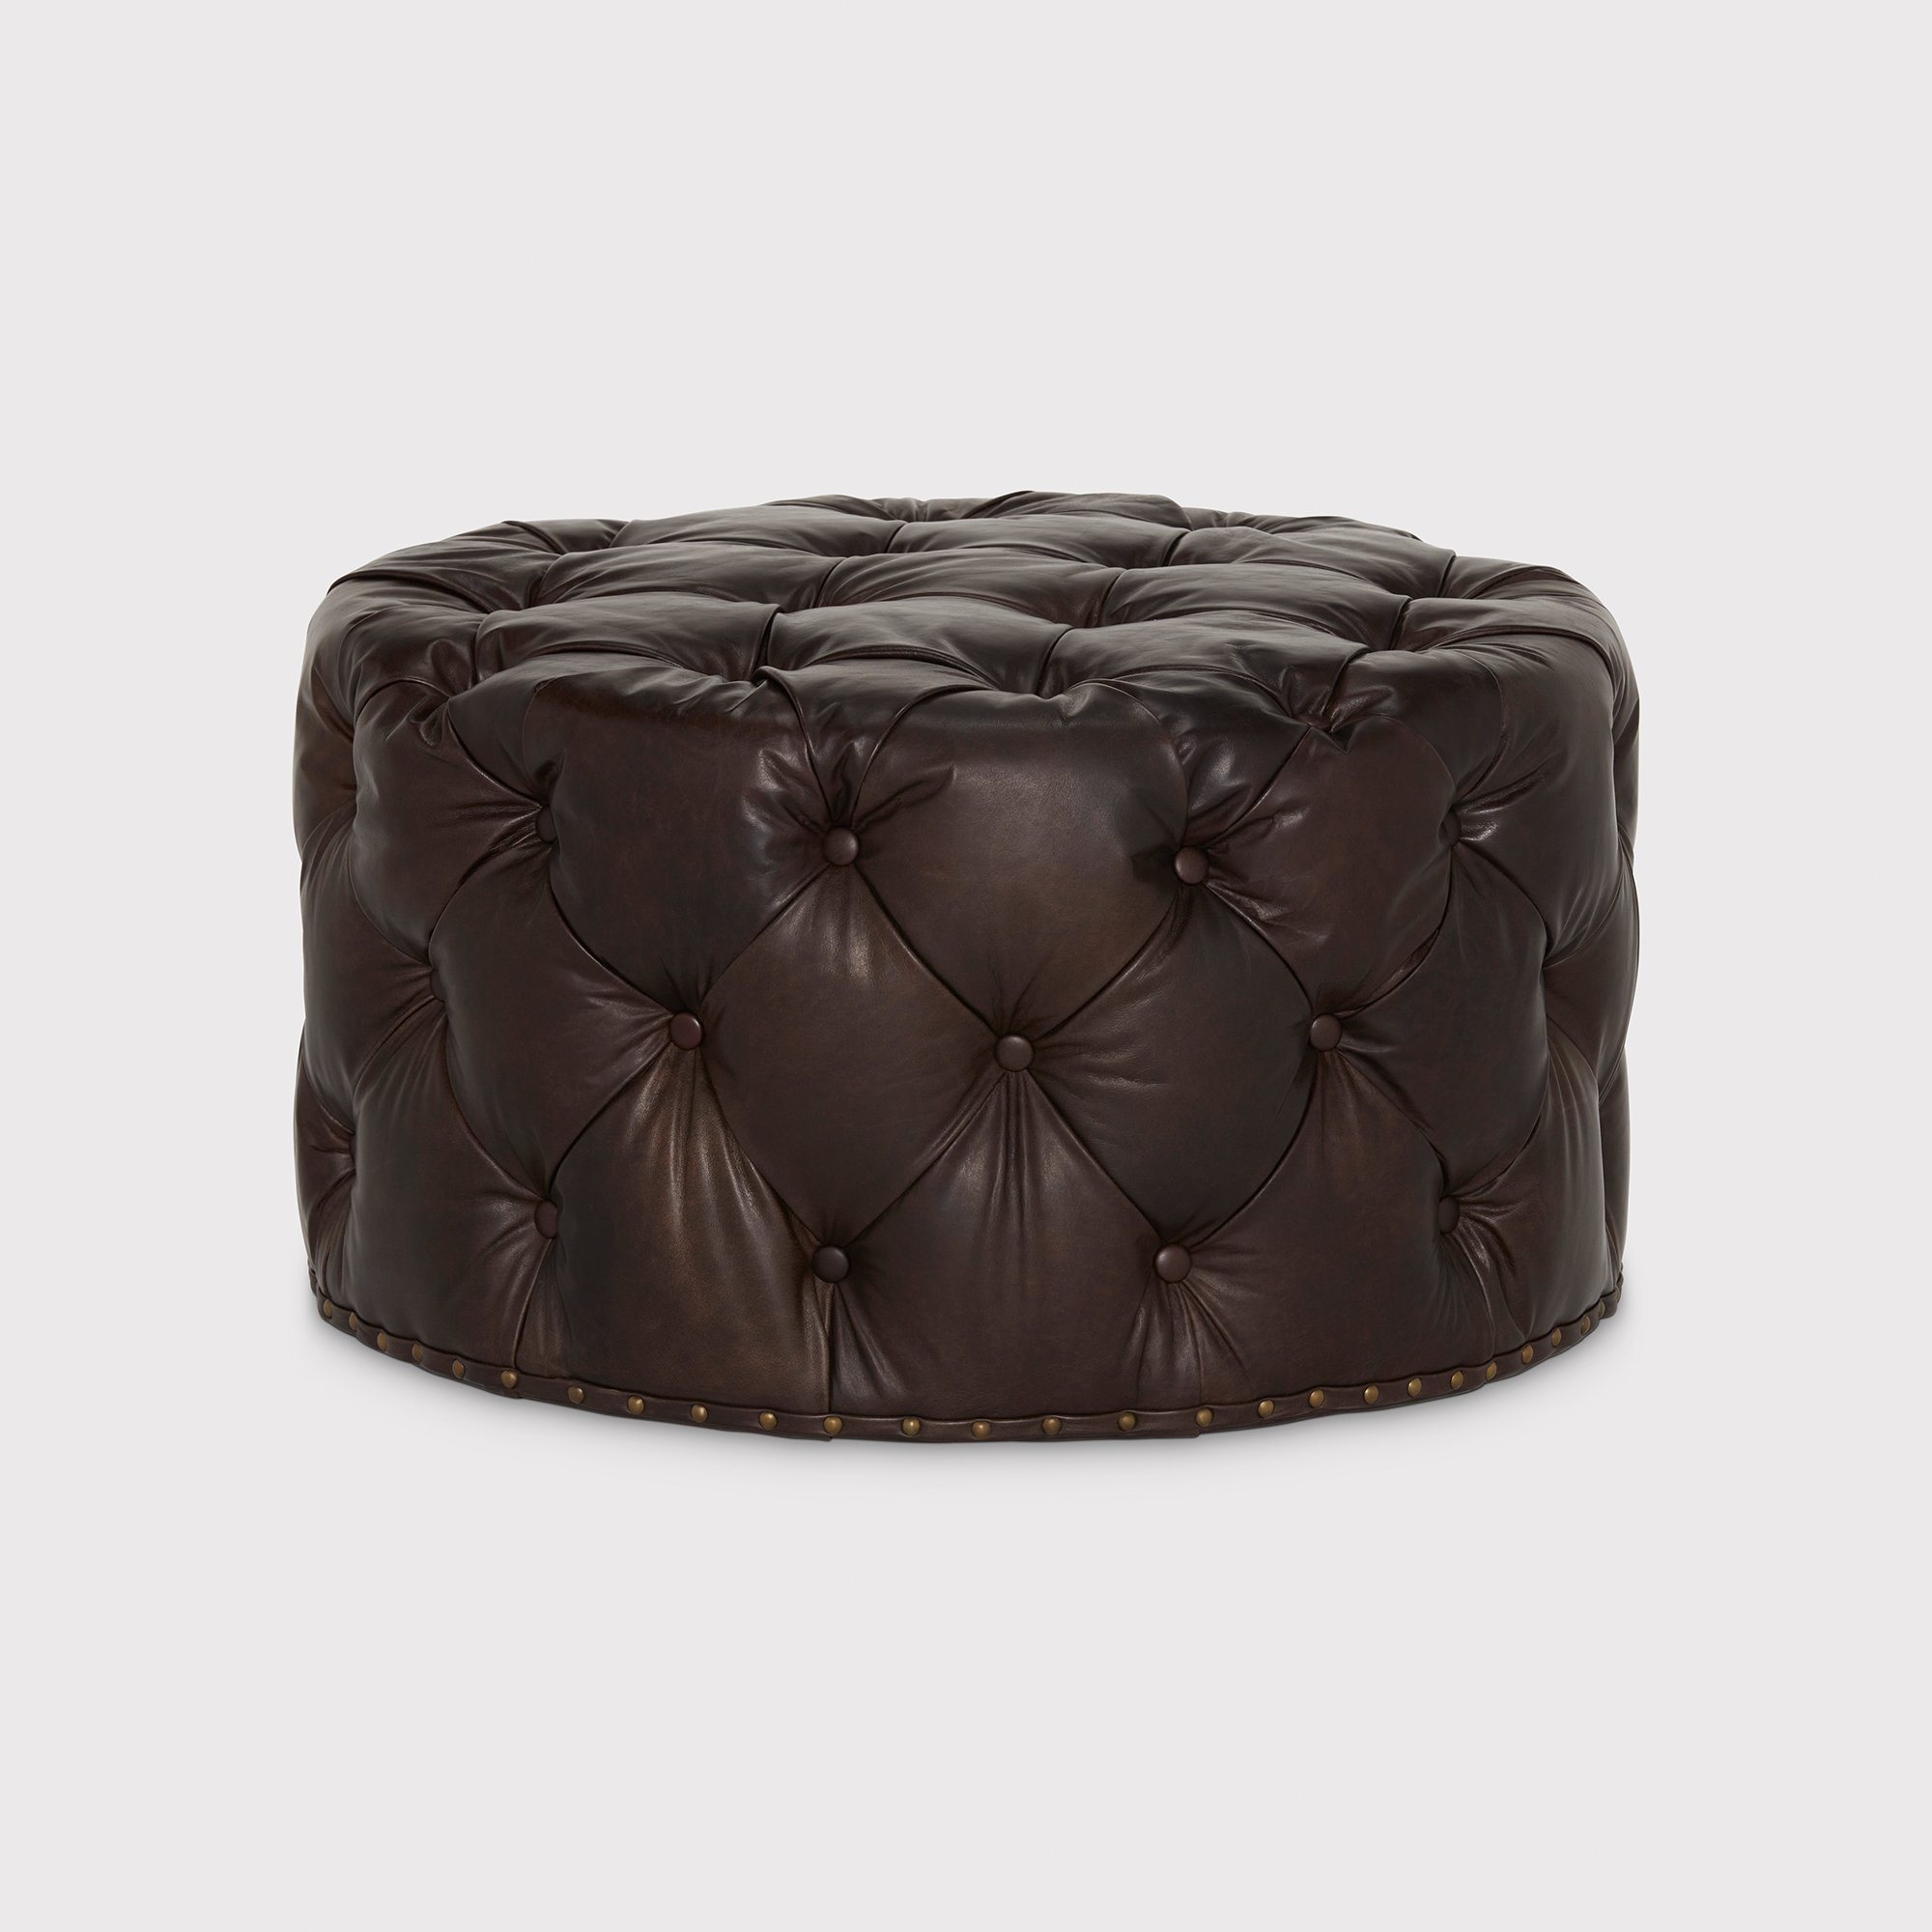 Timothy Oulton Lord Digsby Round Medium Footstool, Brown Leather | Barker & Stonehouse